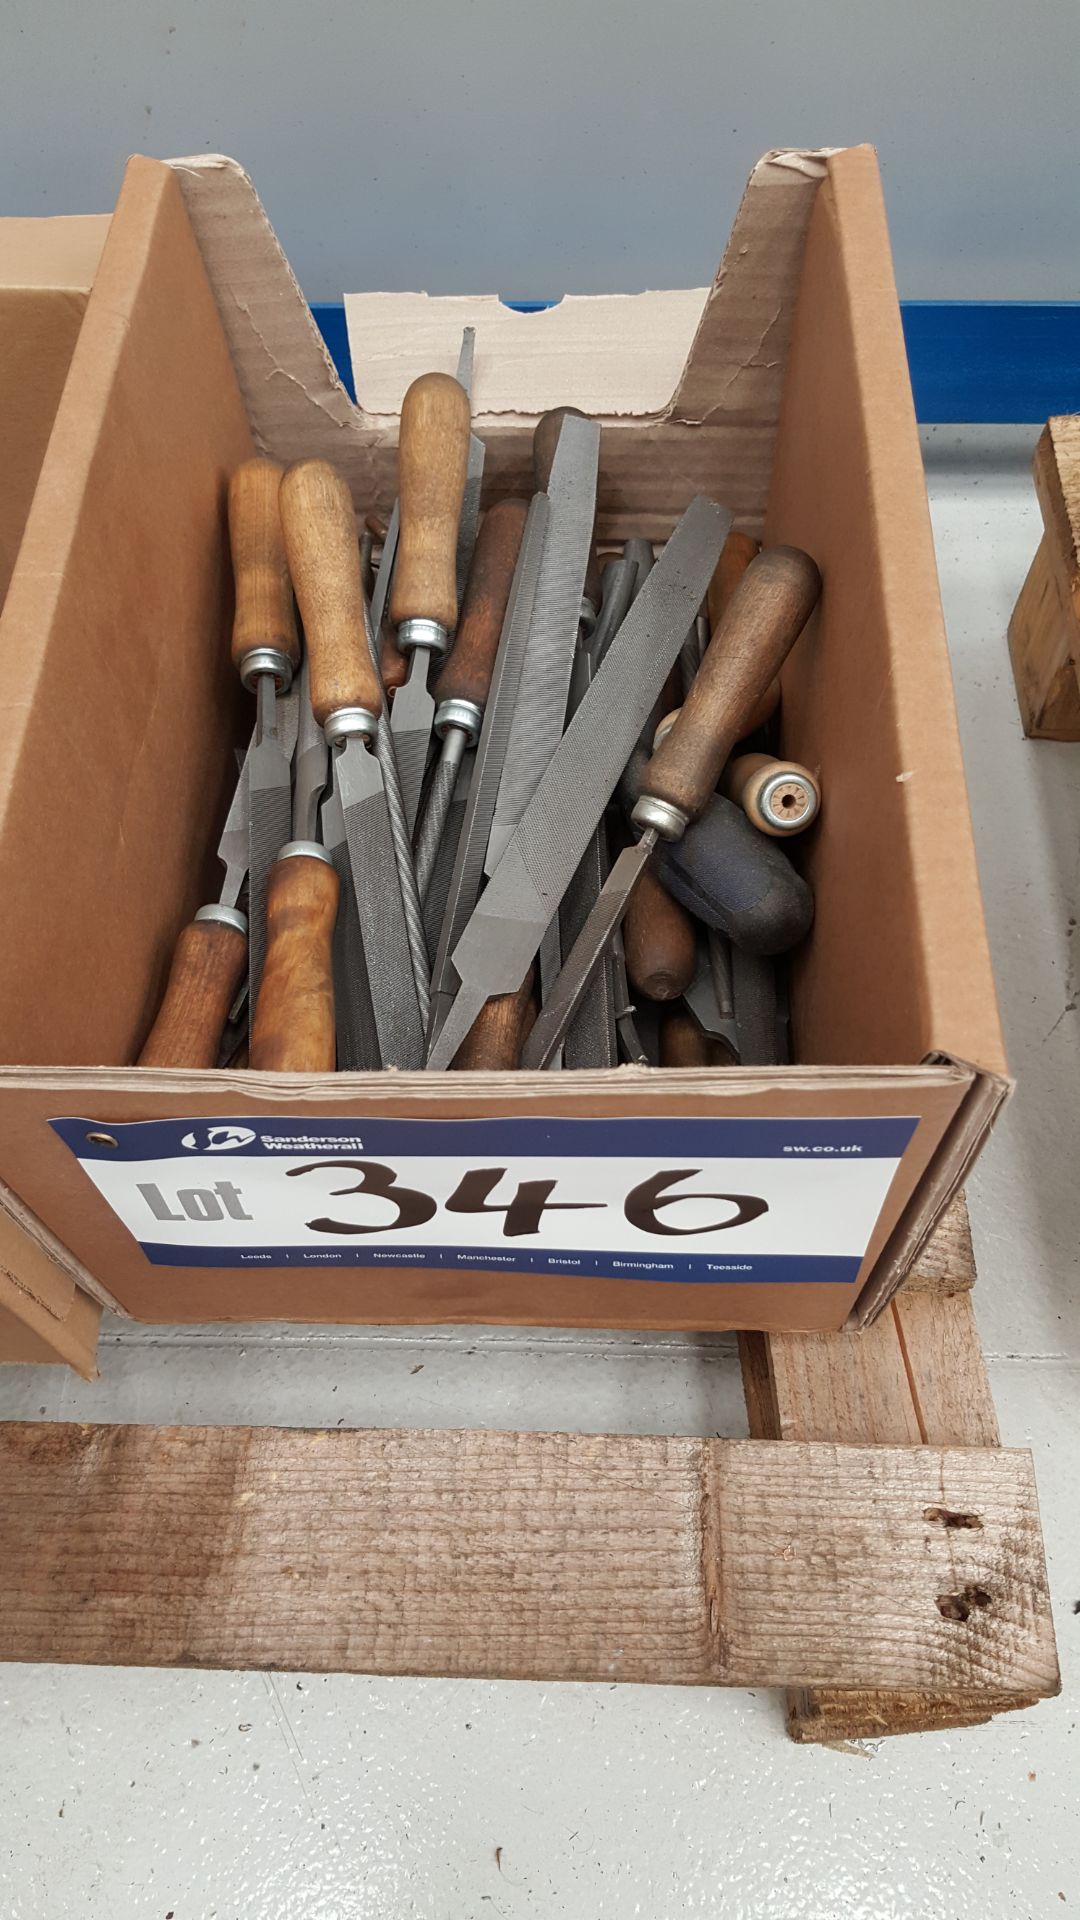 Quantity of Hand Files in Box